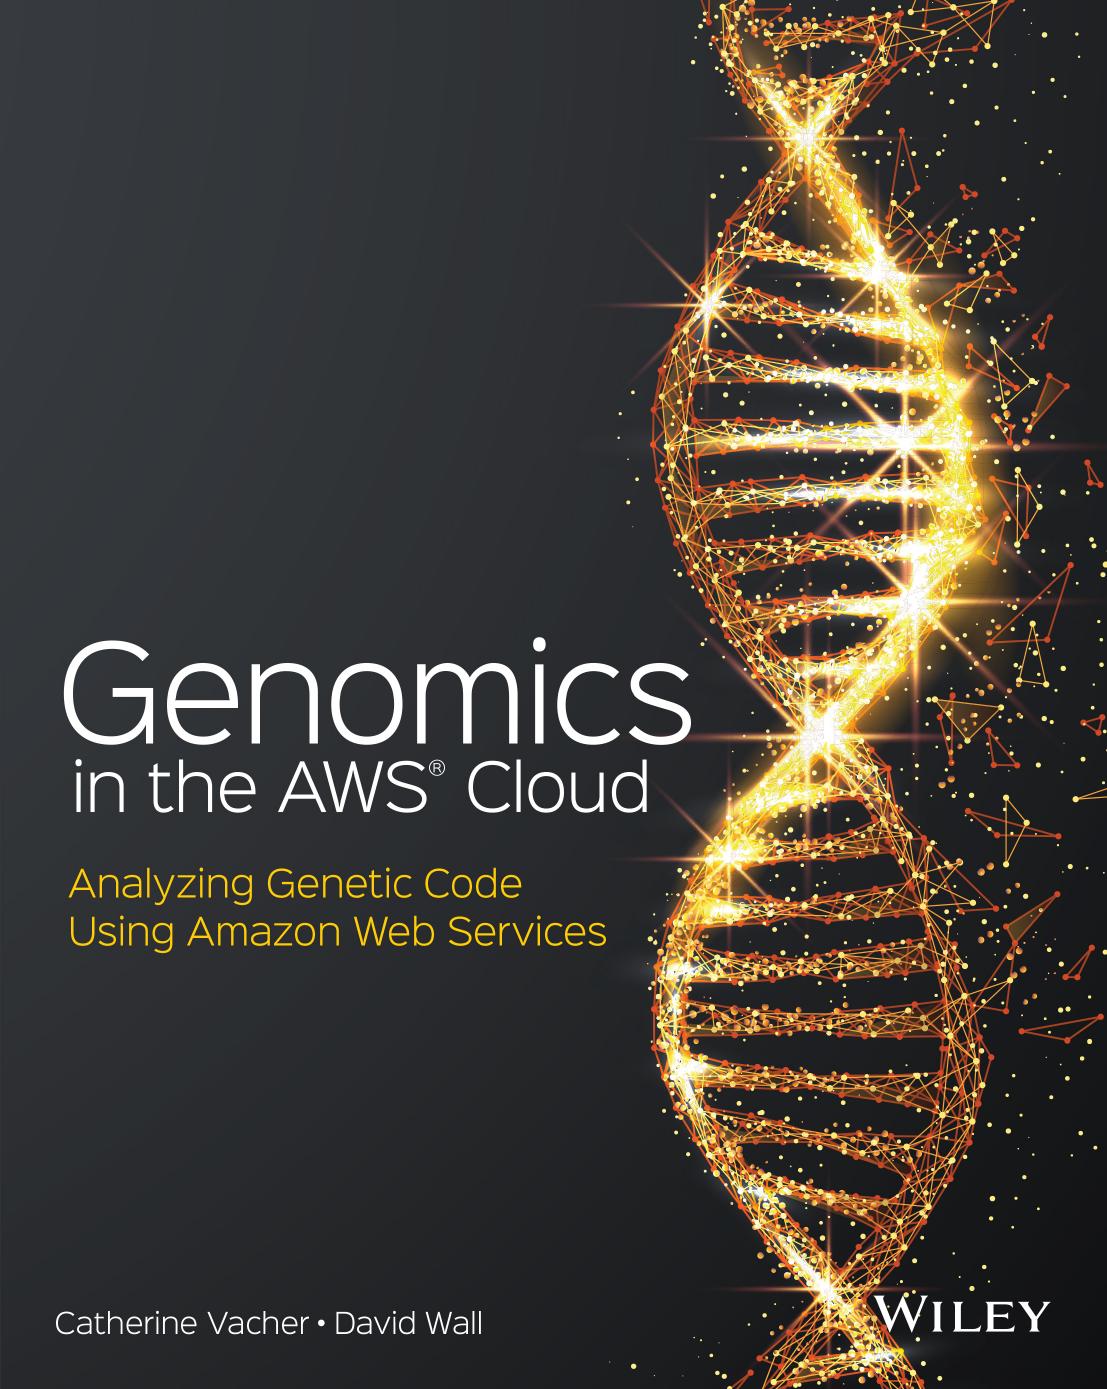 Genomics in the AWSÂ® Cloud by Catherine Vacher and David Wall